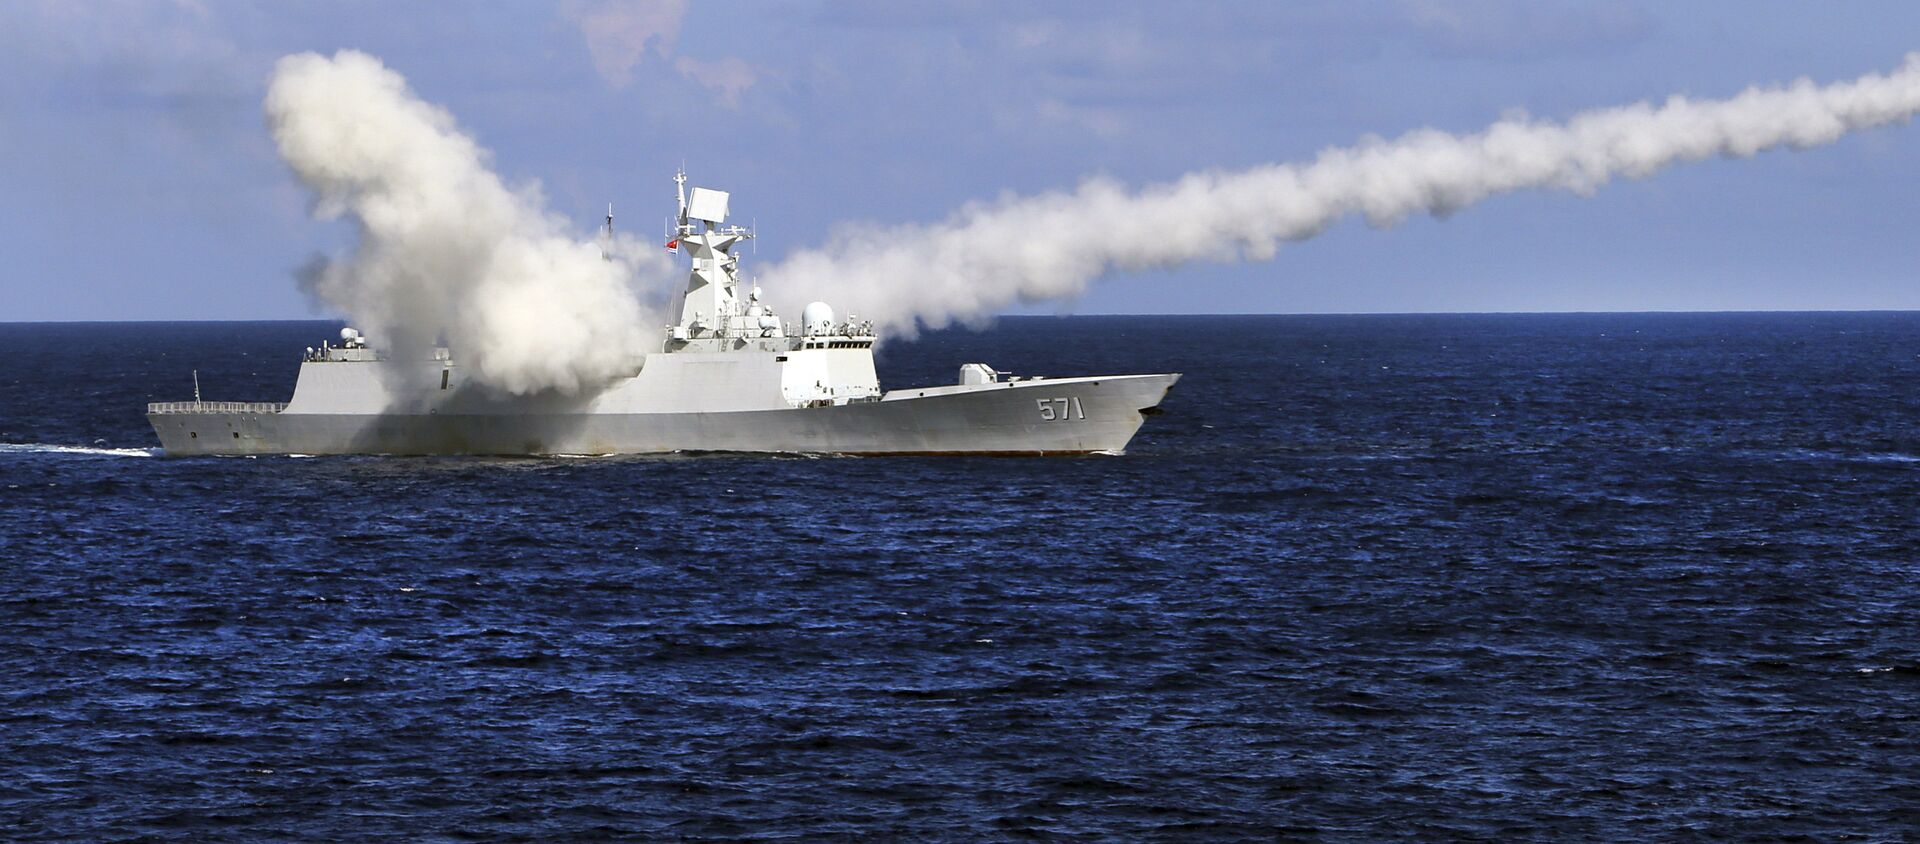 Chinese missile frigate Yuncheng launches an anti-ship missile during a military exercise (File) - Sputnik International, 1920, 04.02.2021